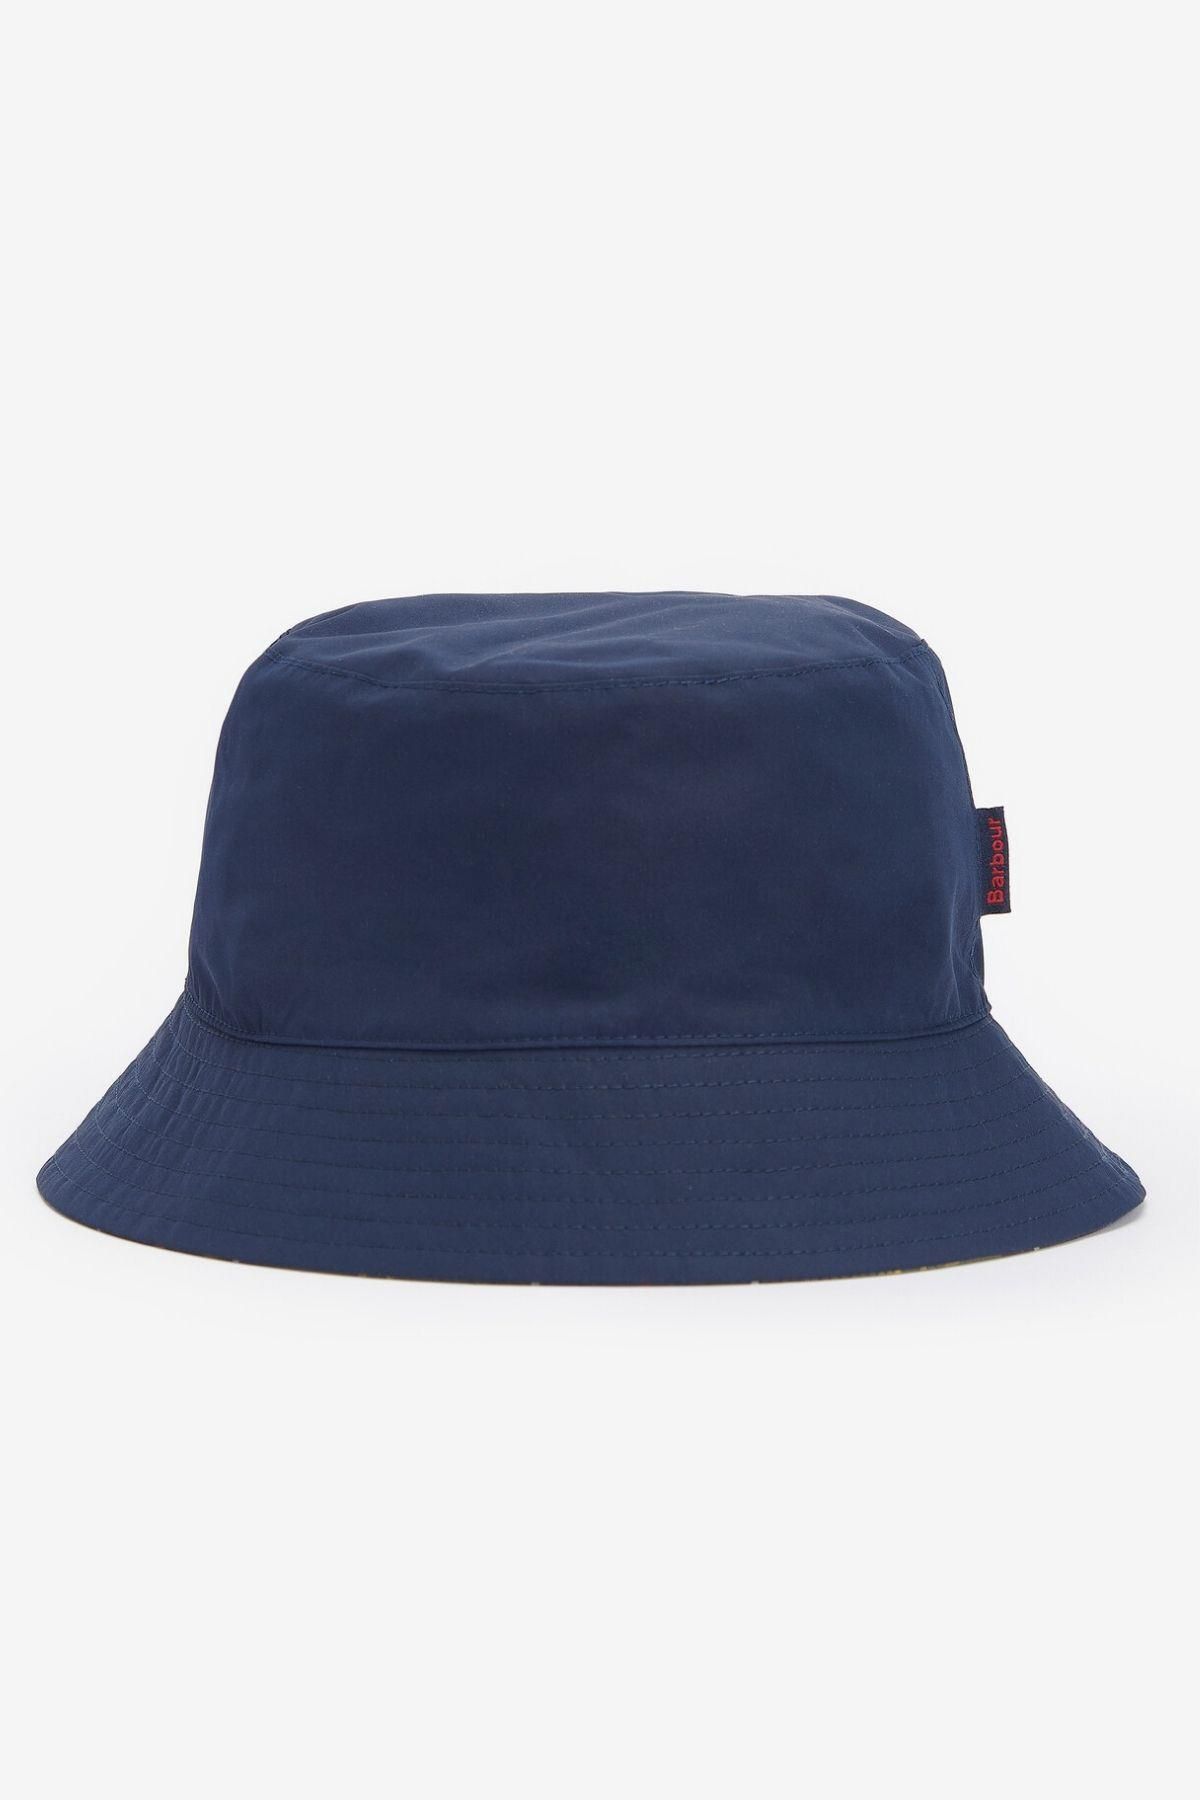 Barbour Hutton Redible Bucket Hat NY52 Navy